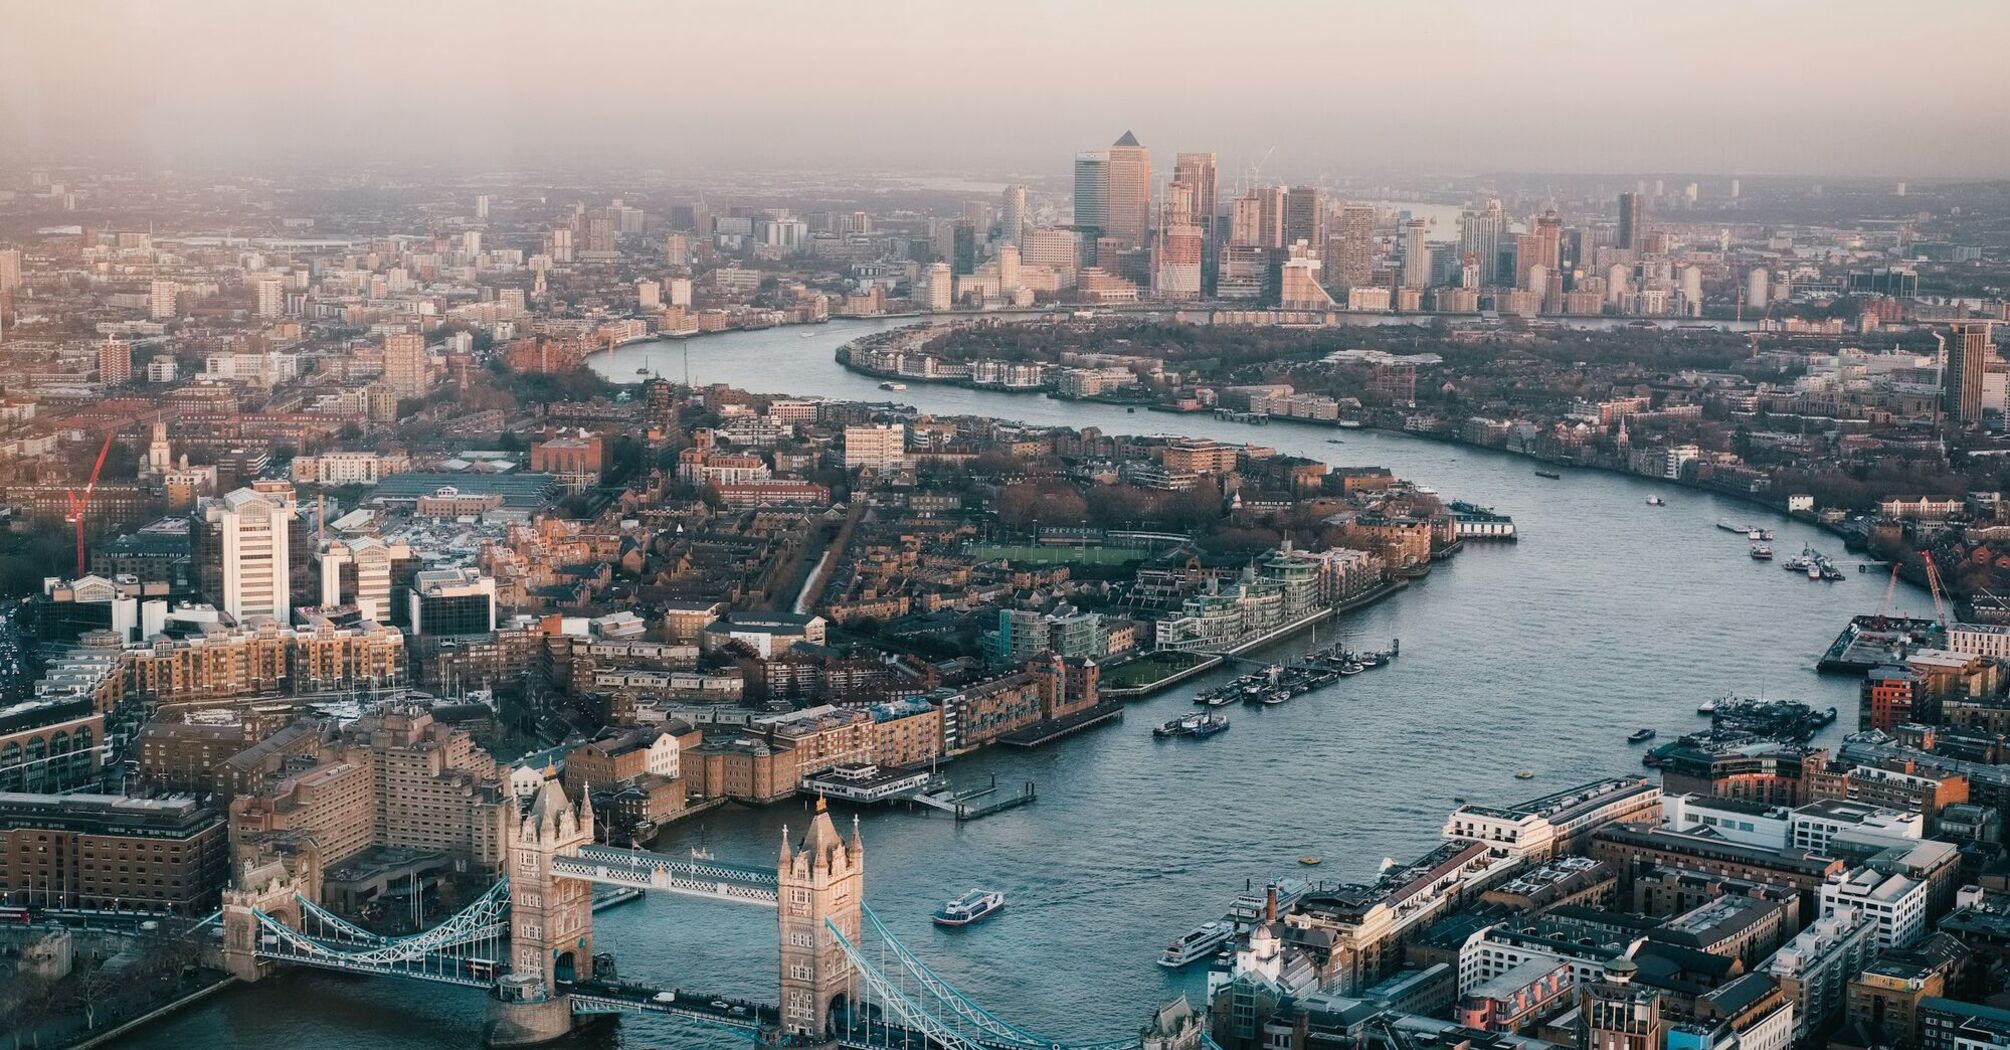 Aerial view of London showcasing the River Thames and iconic landmarks such as the Tower Bridge and Canary Wharf